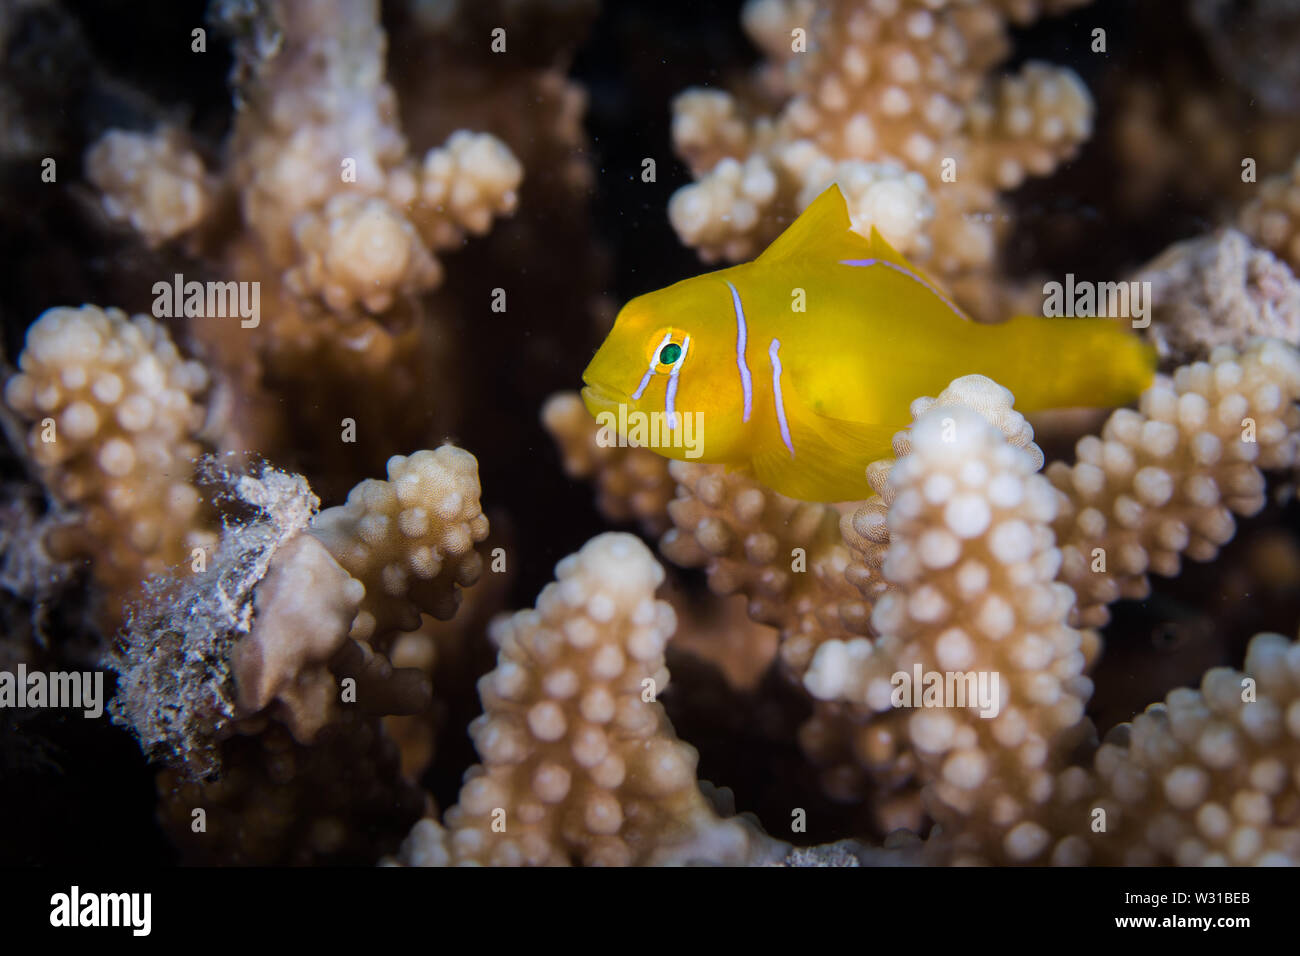 Macro of a Citron coral goby (Gobiodon citrinus) in a hard coral. Small bright yellow fish with white stripes on head. Stock Photo